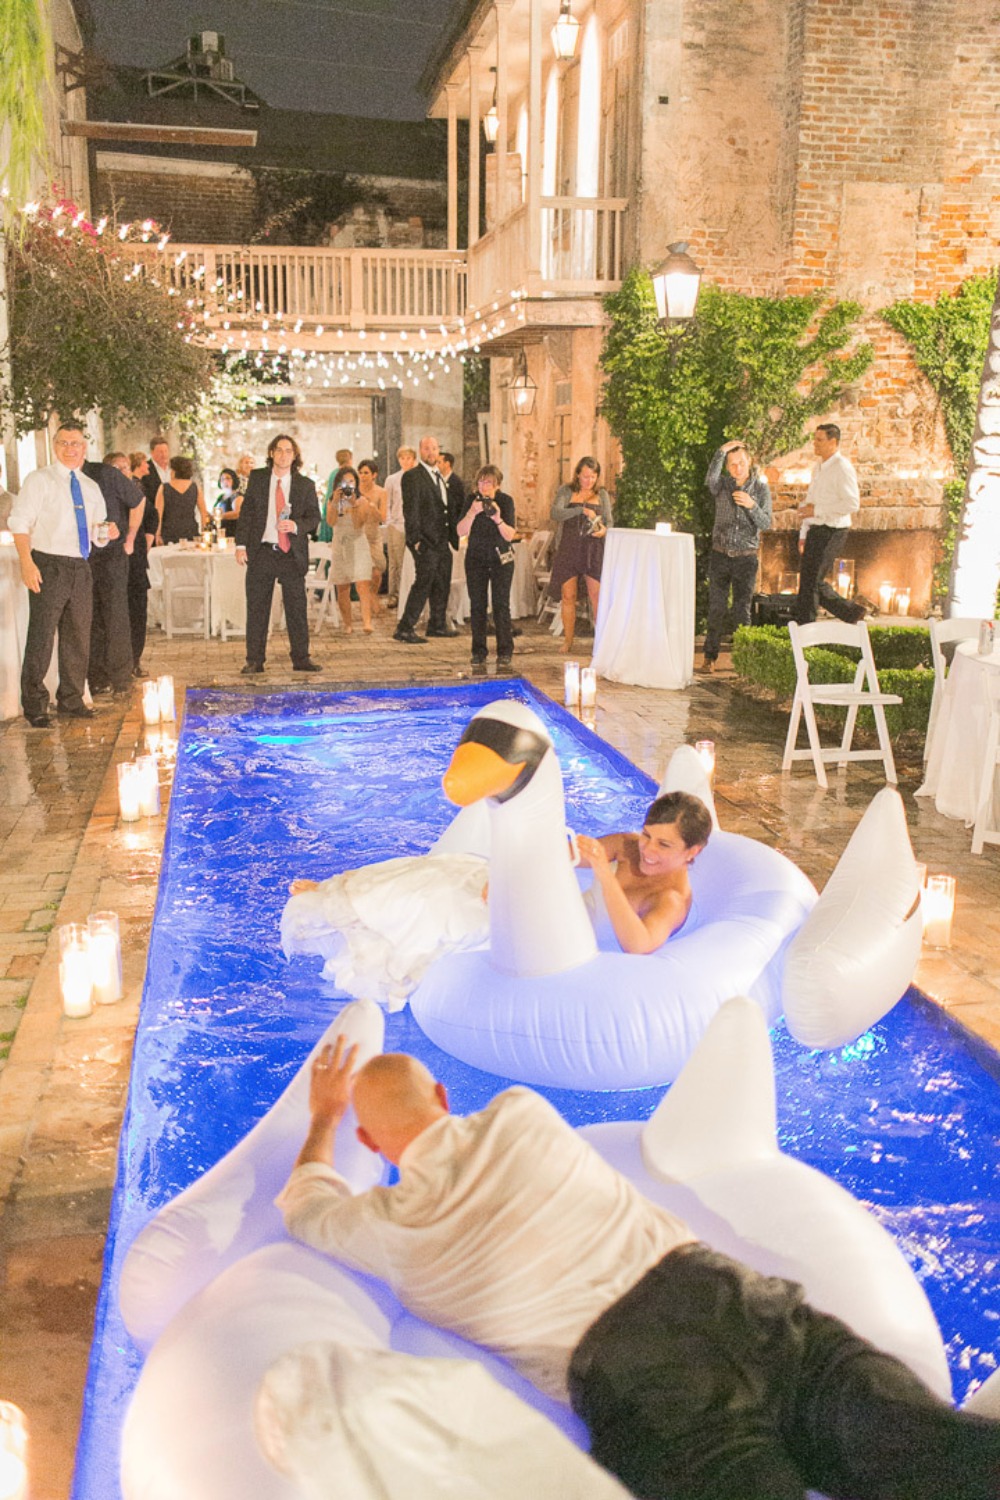 inflatable swan floats for an impromptu pool party